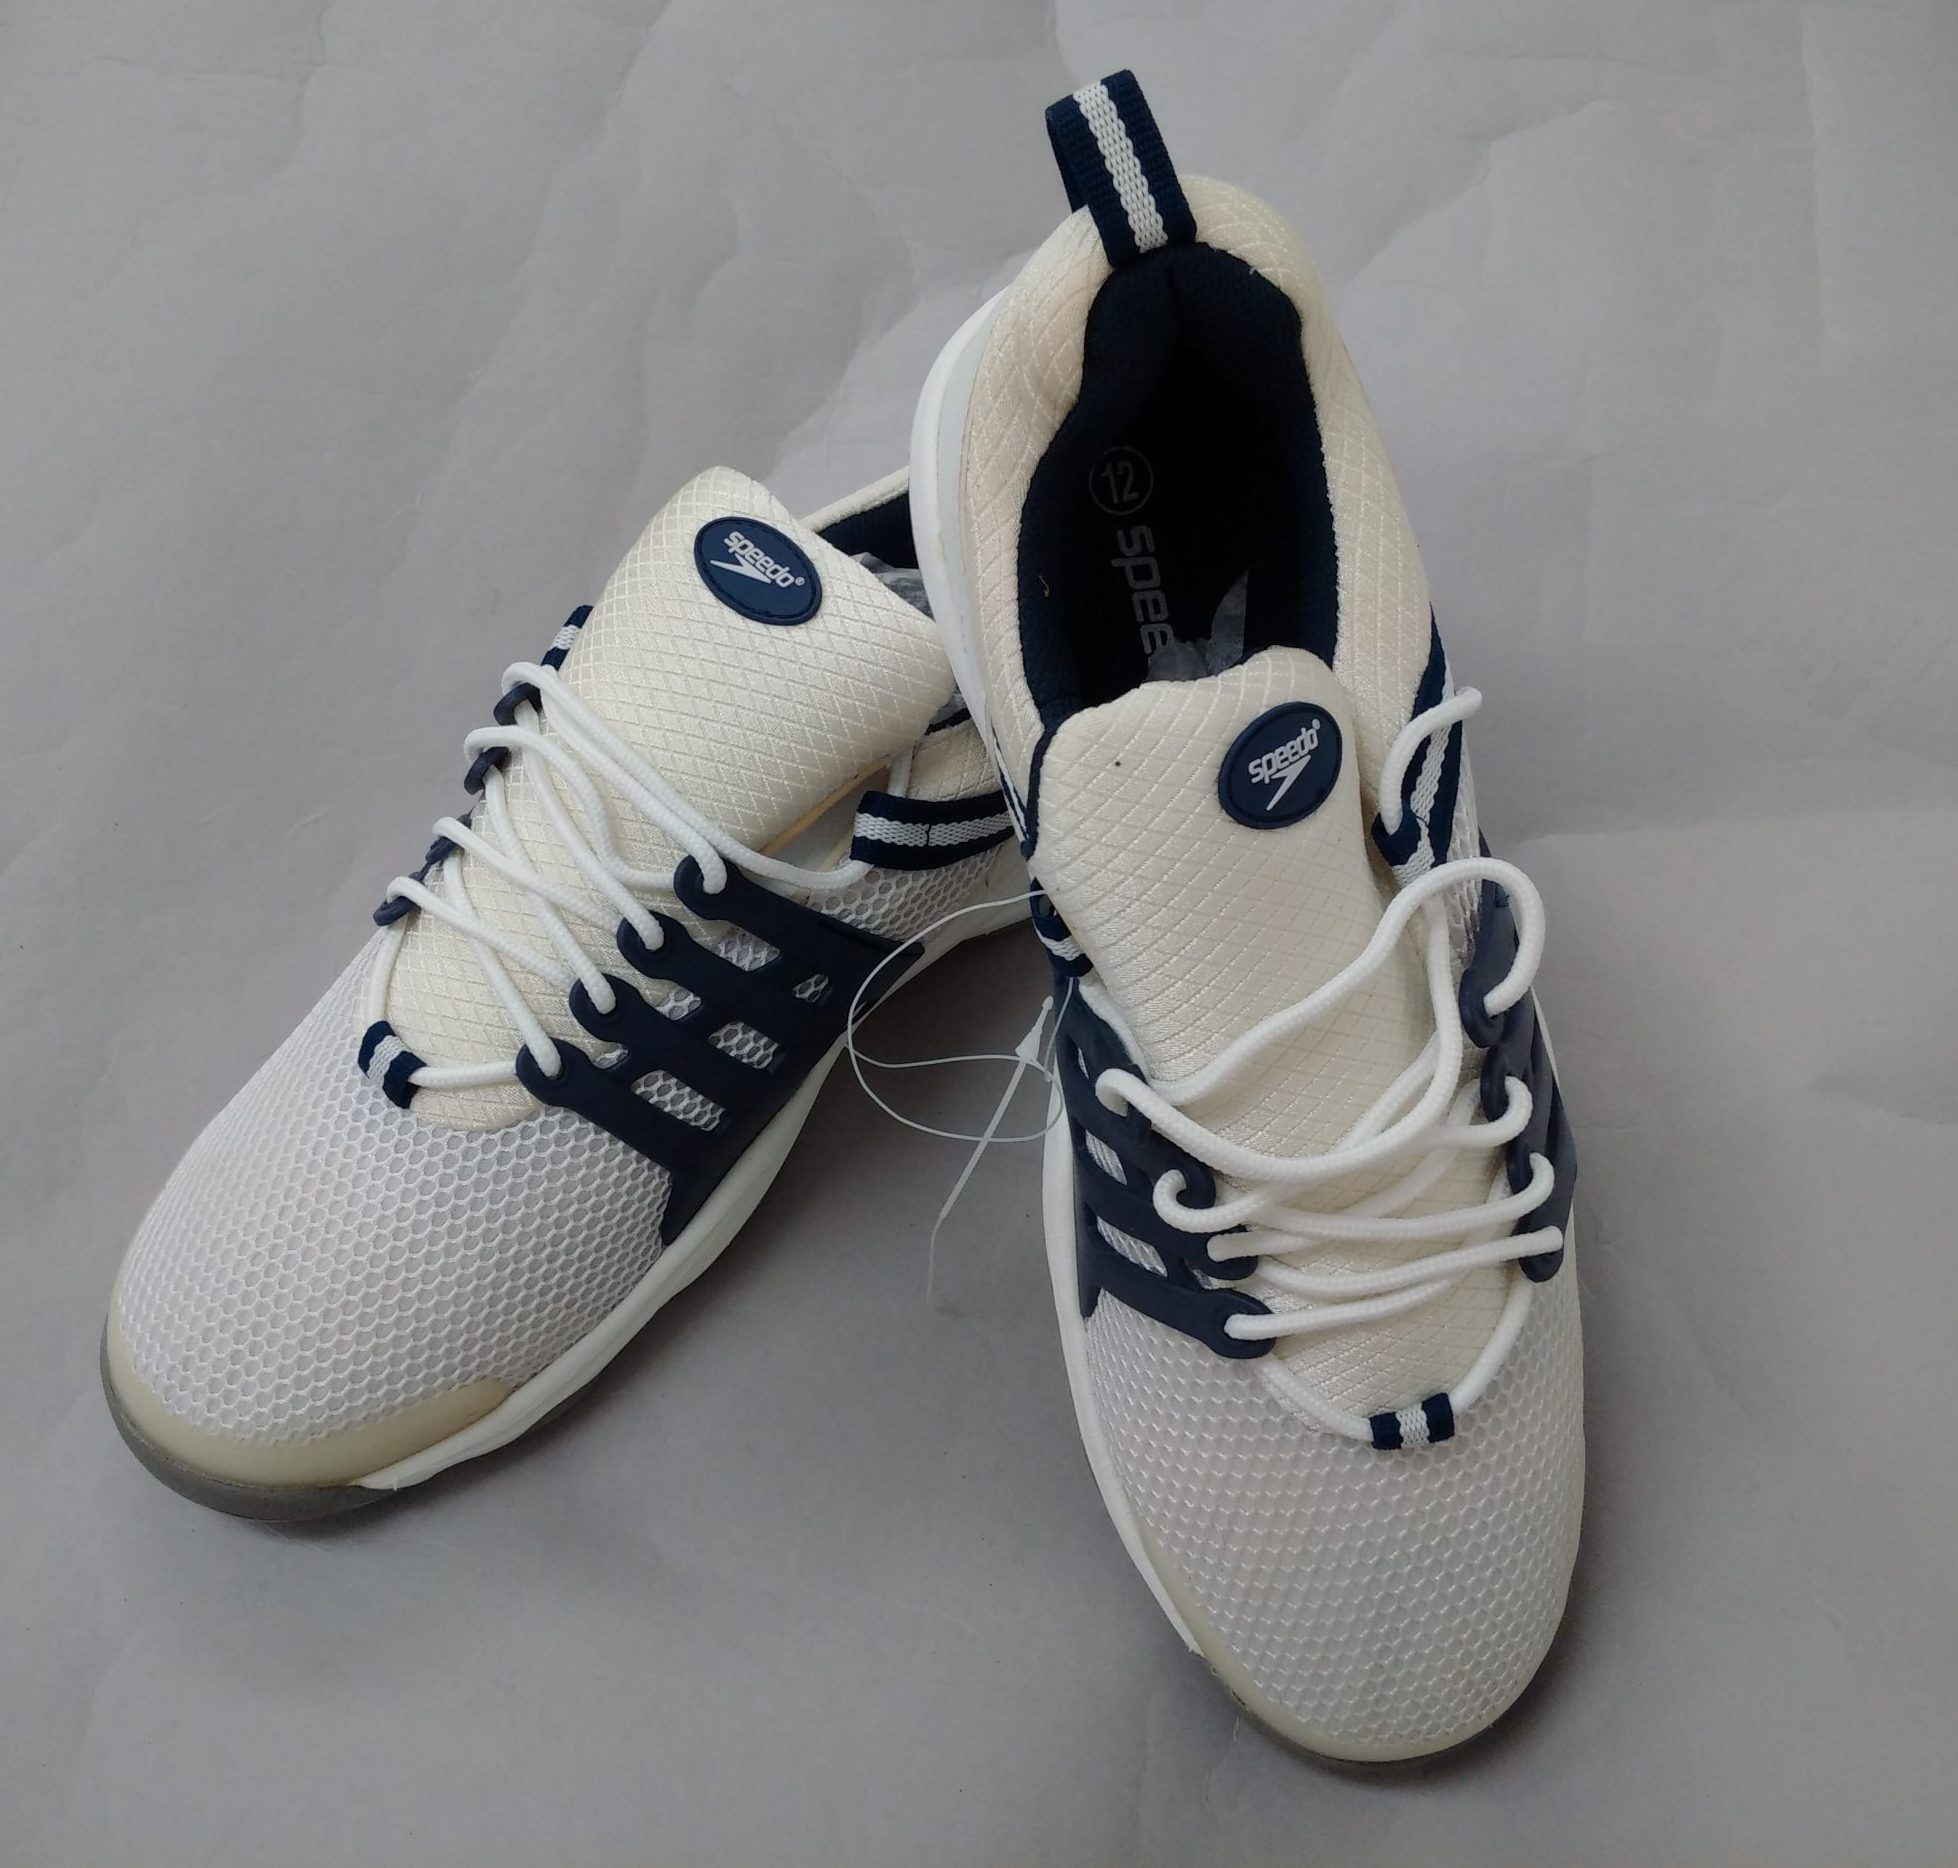 mens water shoes size 12